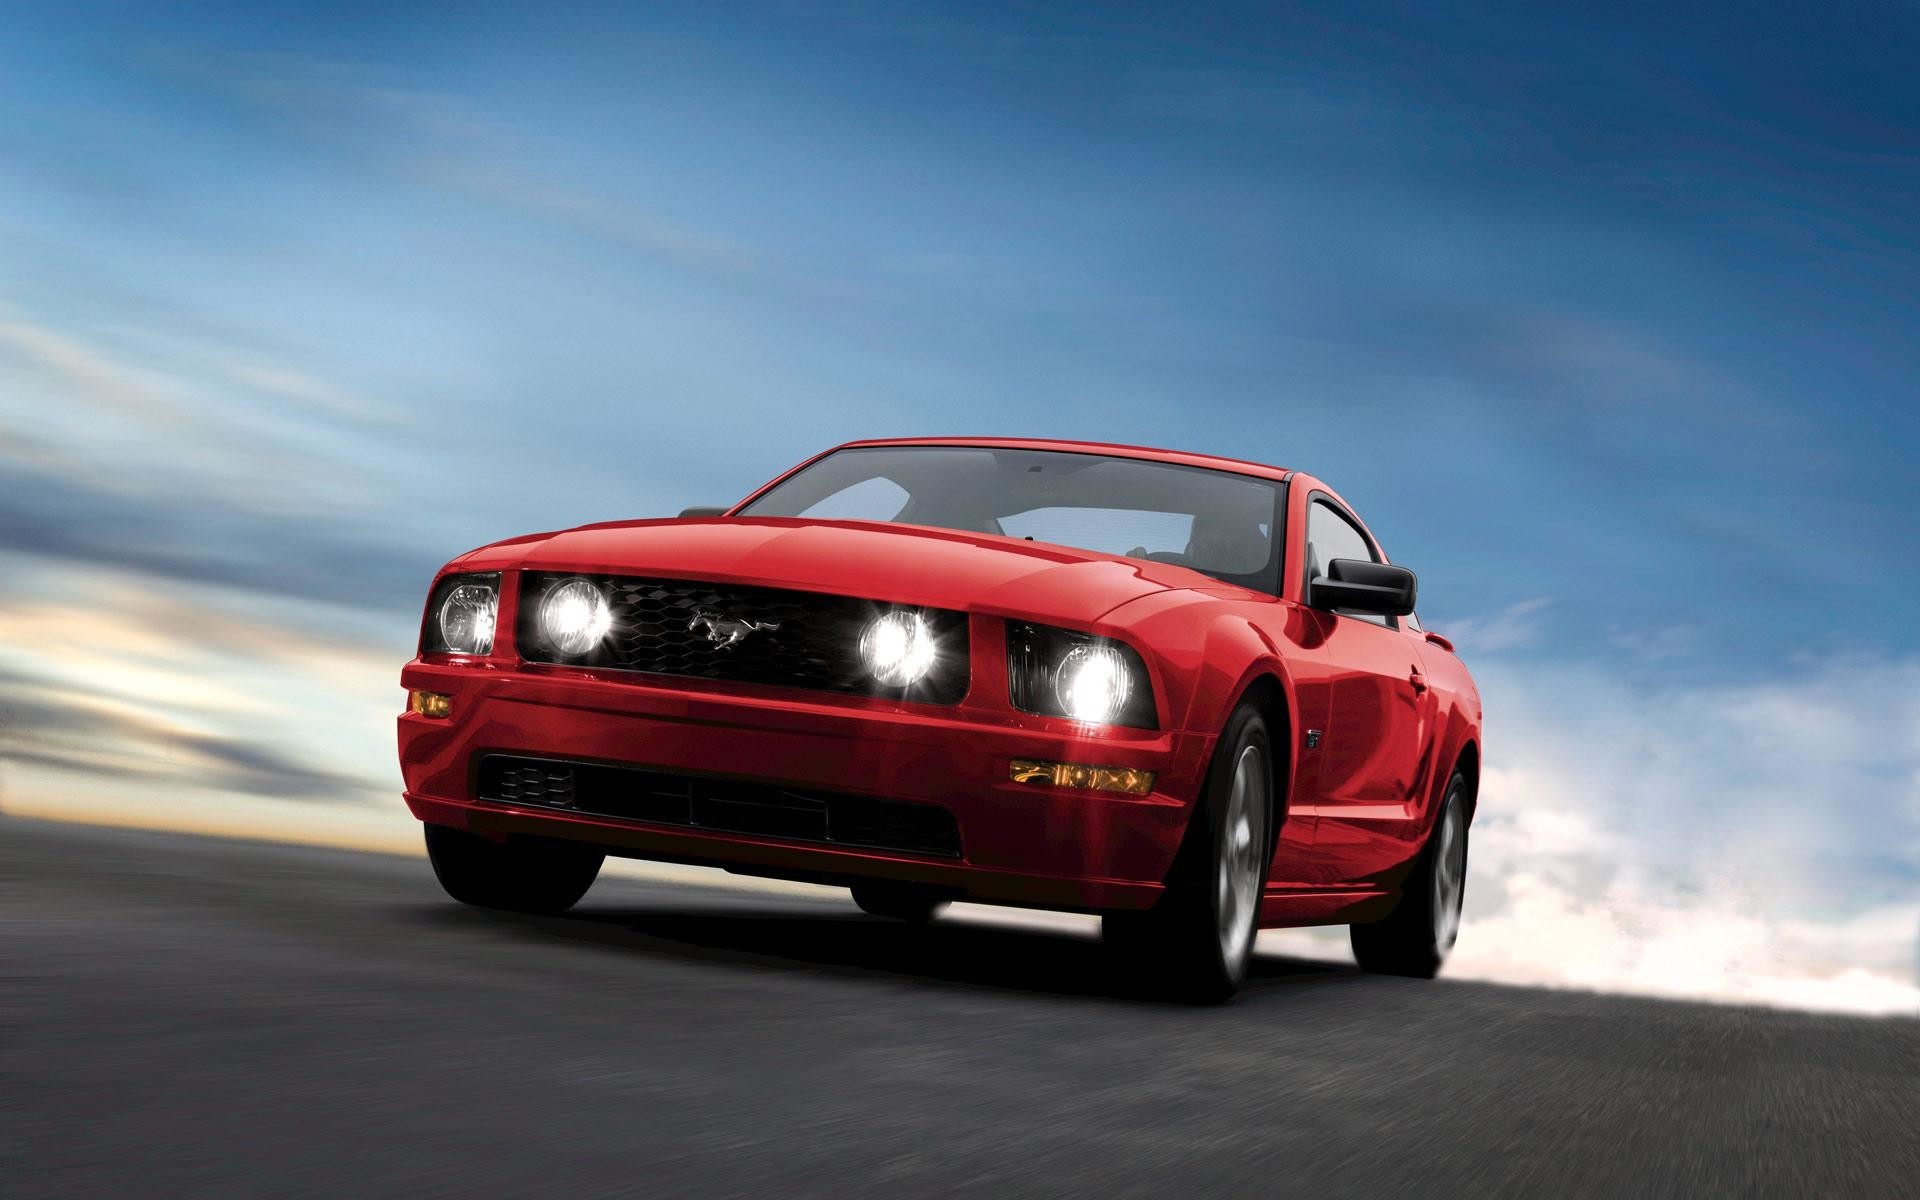 1920x1200 Ford Mustang Iphone Wallpaper Live Car Widescreen For Hd Pics Ford Mustang  Live Wallpaper